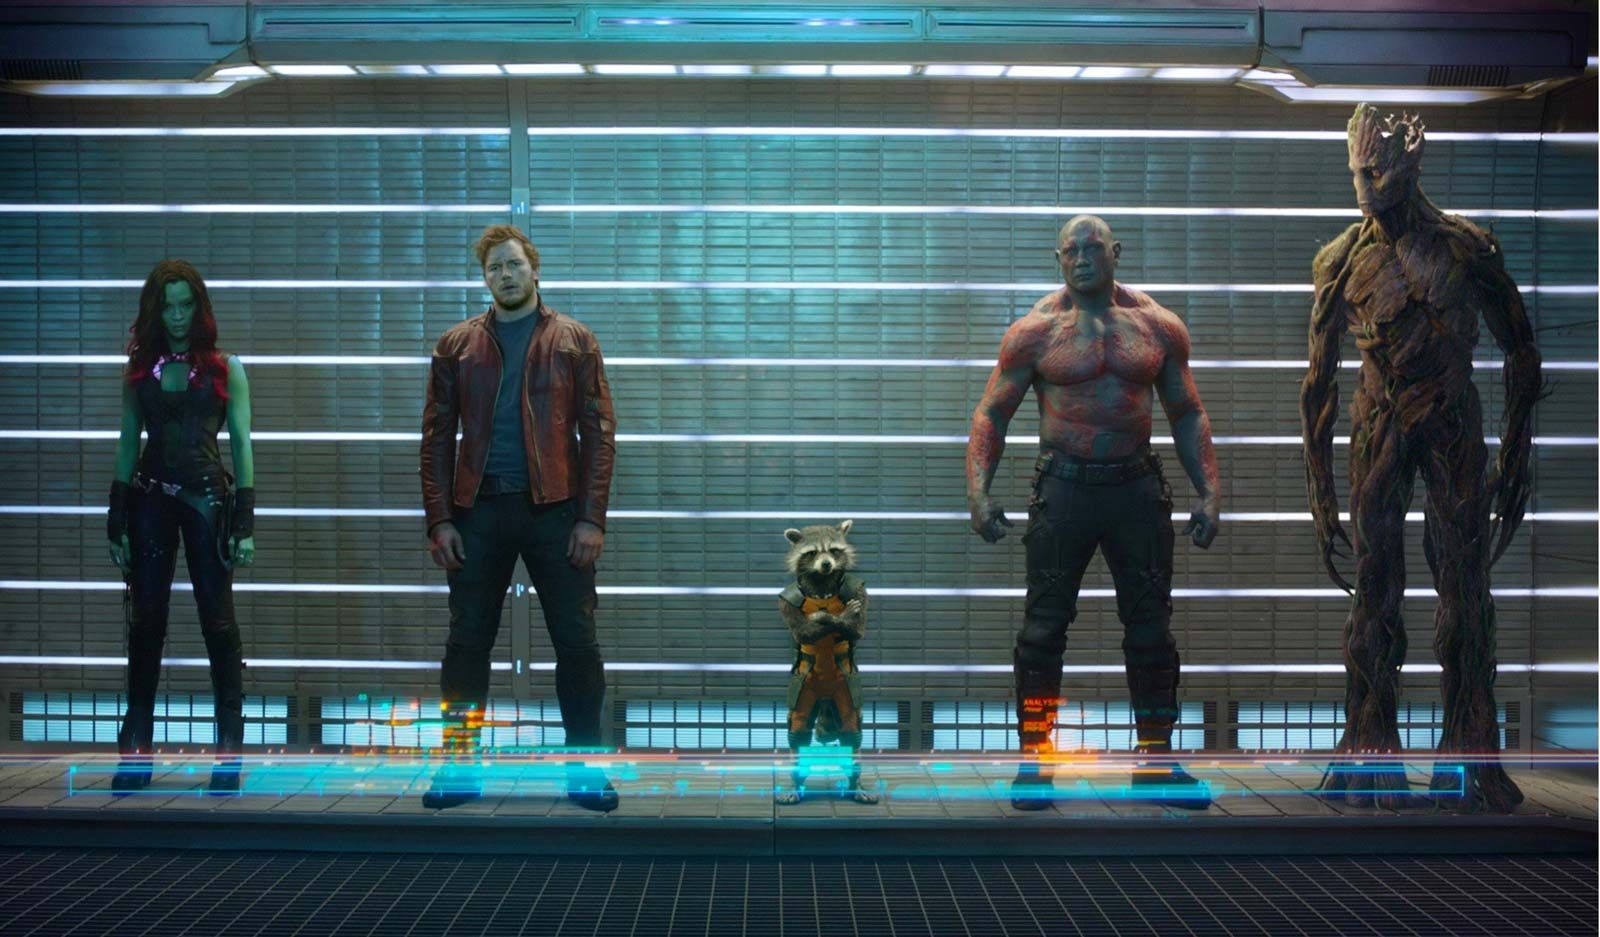 The Guardians of the Galaxy from a deleted scene in Vol. 1